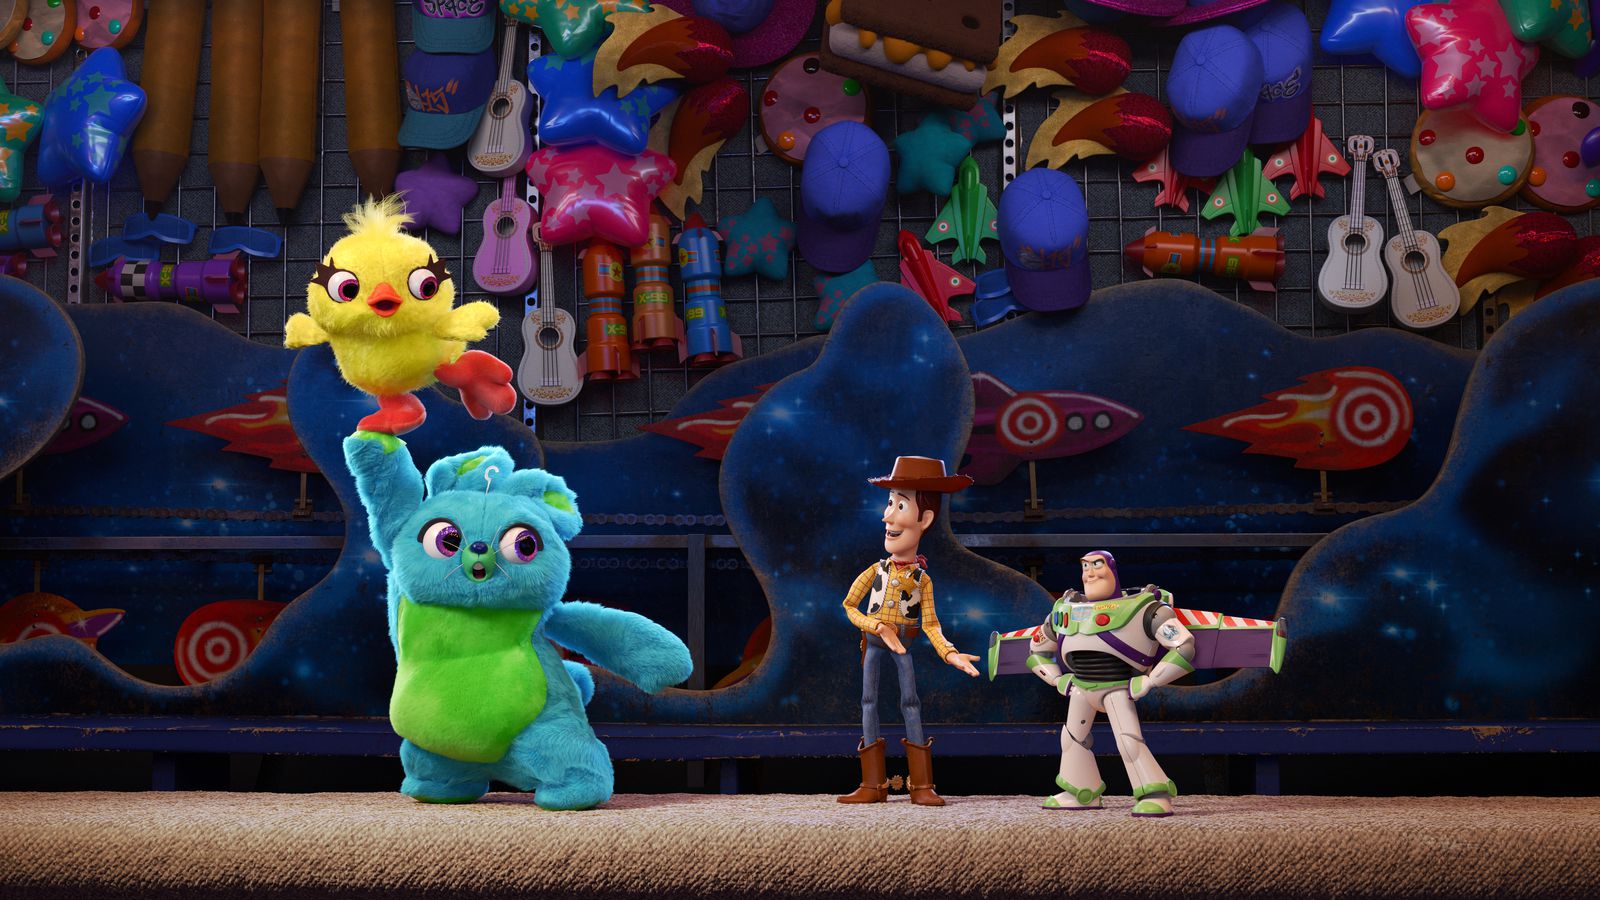 Toy Story 4 teaser trailer is Key and Peeles jam   CNET